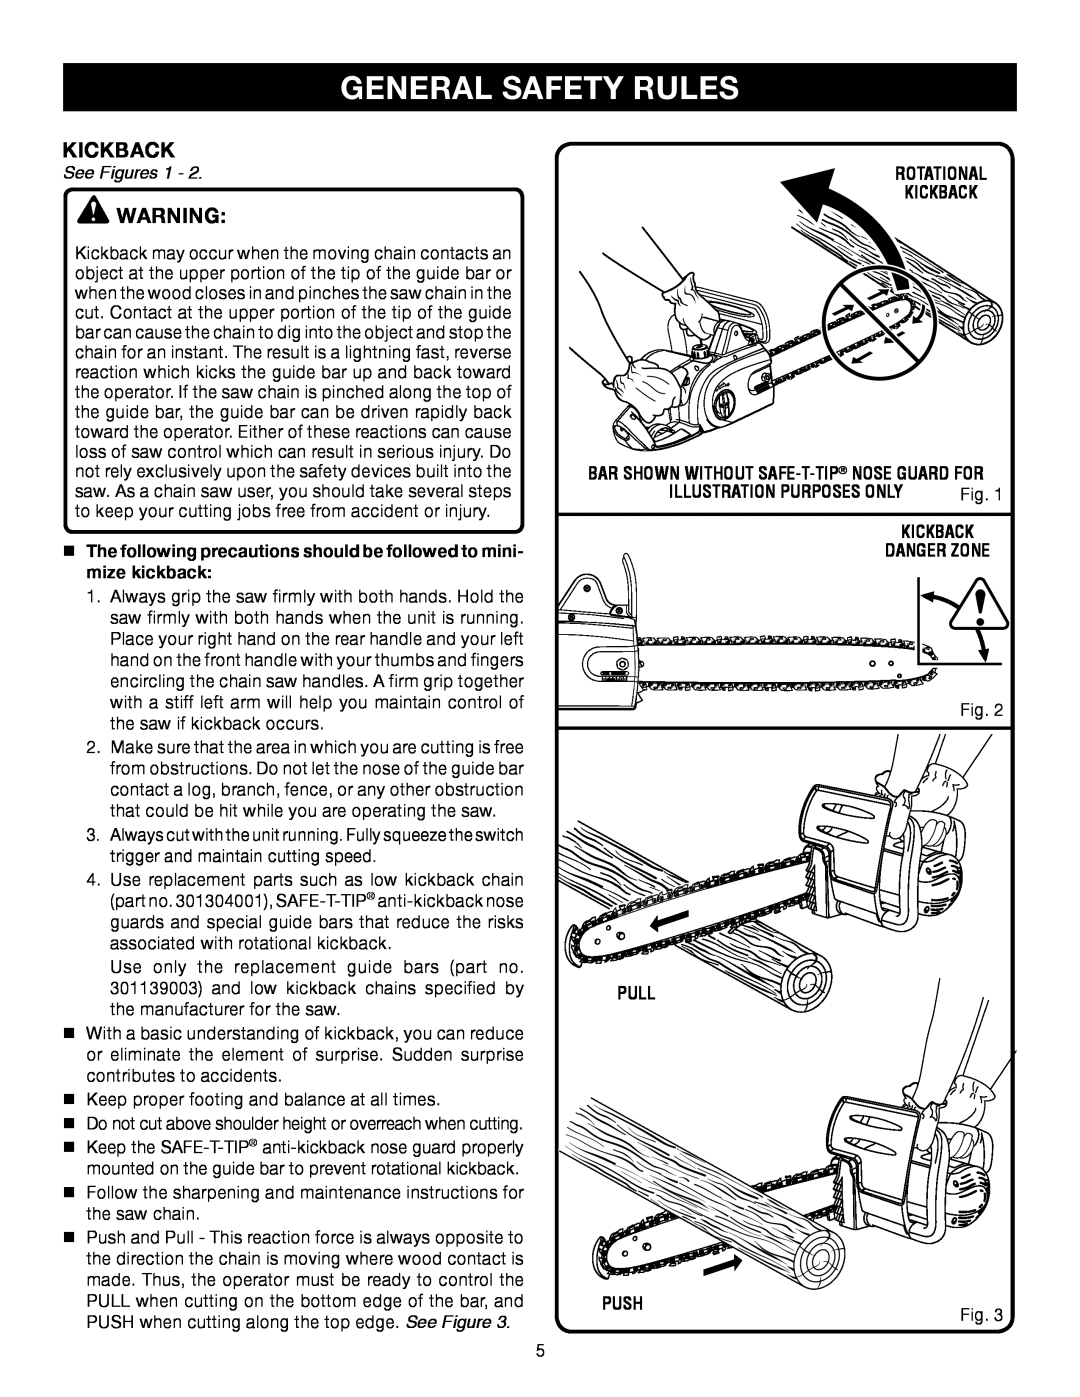 Ryobi RY43006 manual General Safety Rules, See Figures 1, Illustration Purposes Only, Kickback Danger Zone, Pull, Push 